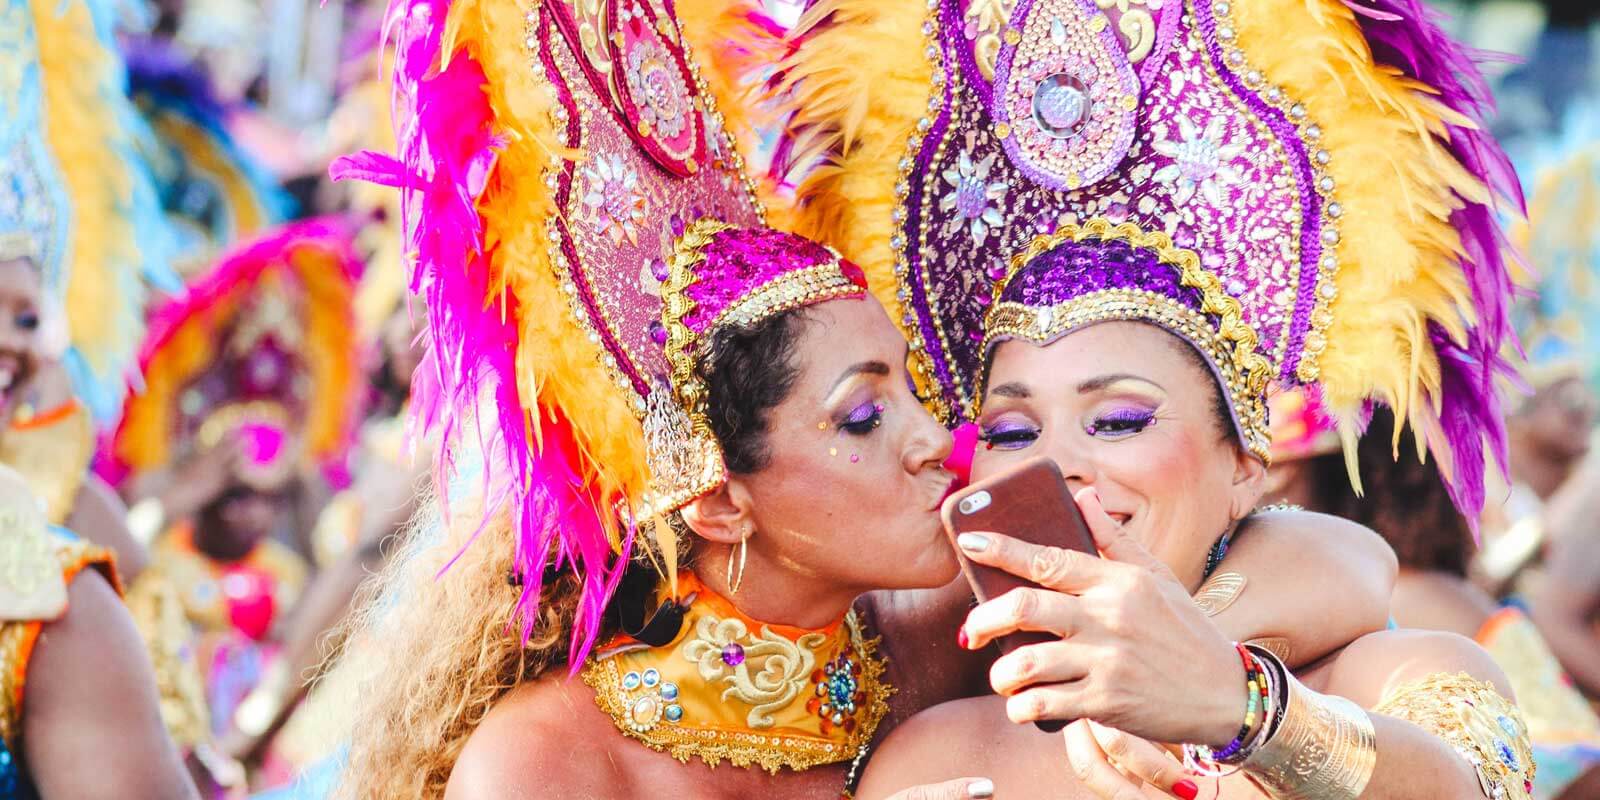 Two women in elaborate Carnival costumes and head dress taking a selfie with a phone.